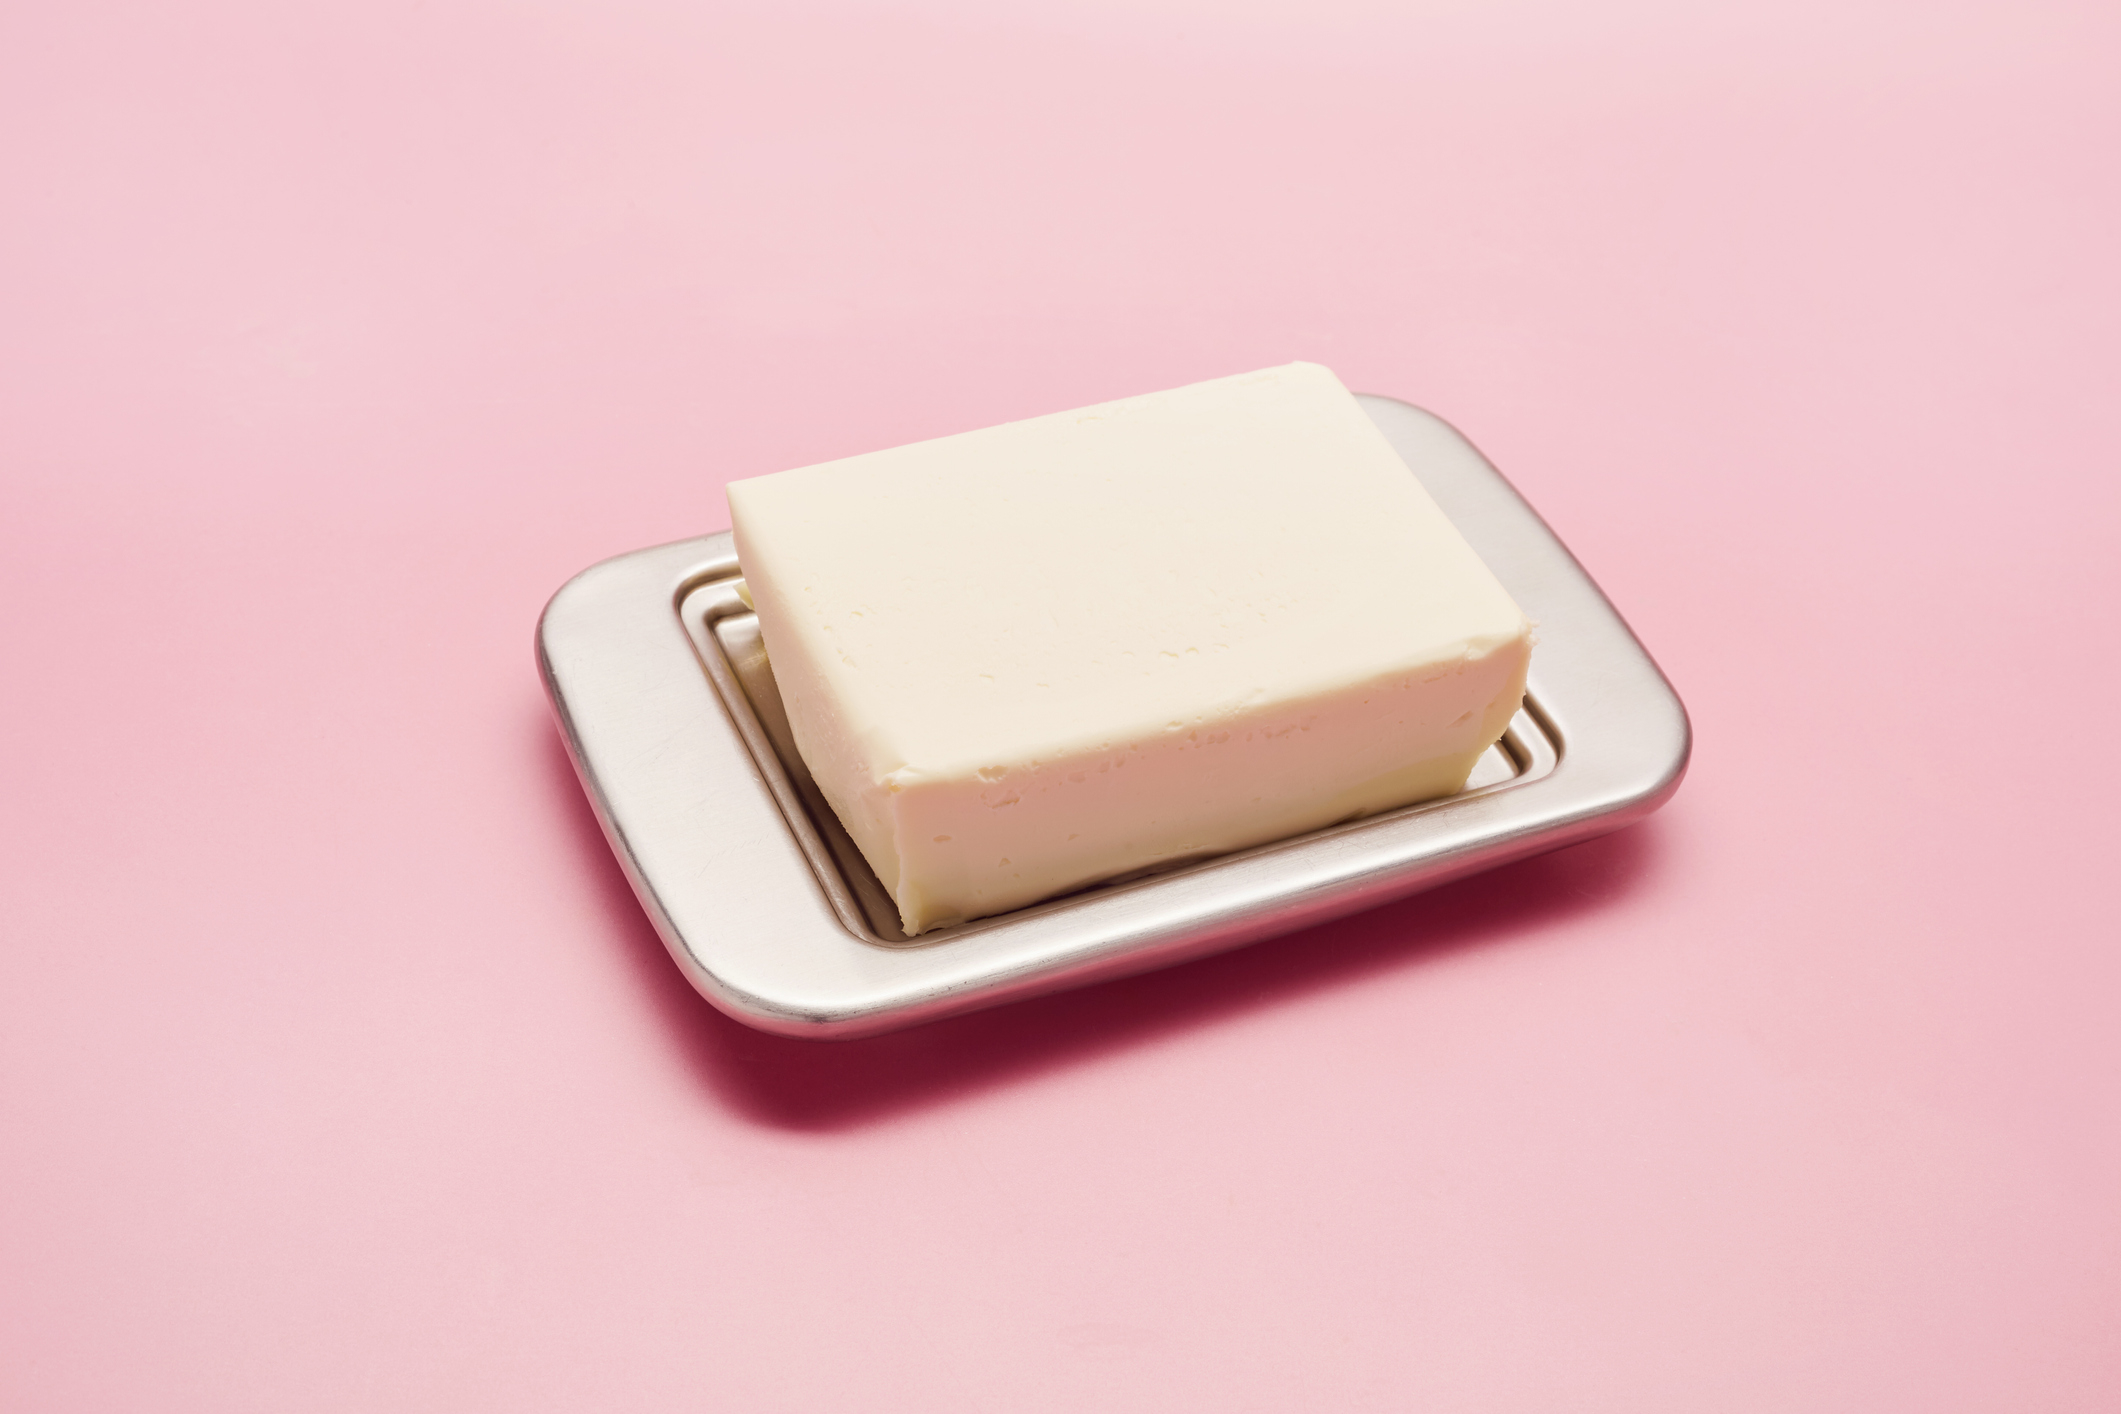 A slab of butter on a silver platter, photographed over a colored background